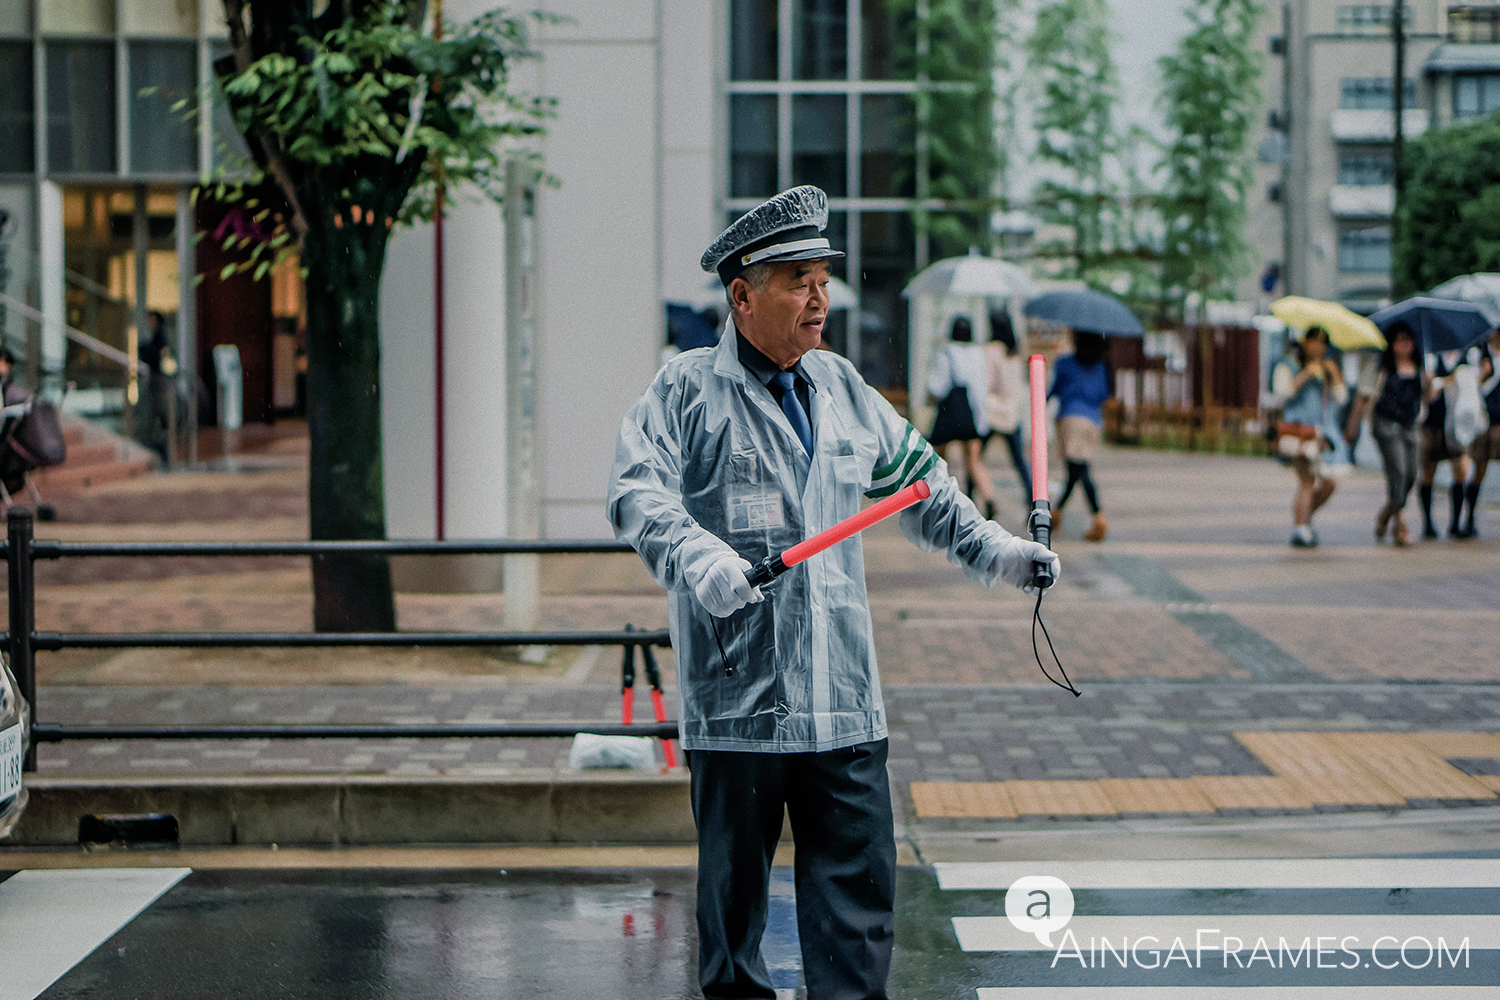 A crossing guard directing traffic in front of a giant shopping center in Kyoto on a cold, rainy day.